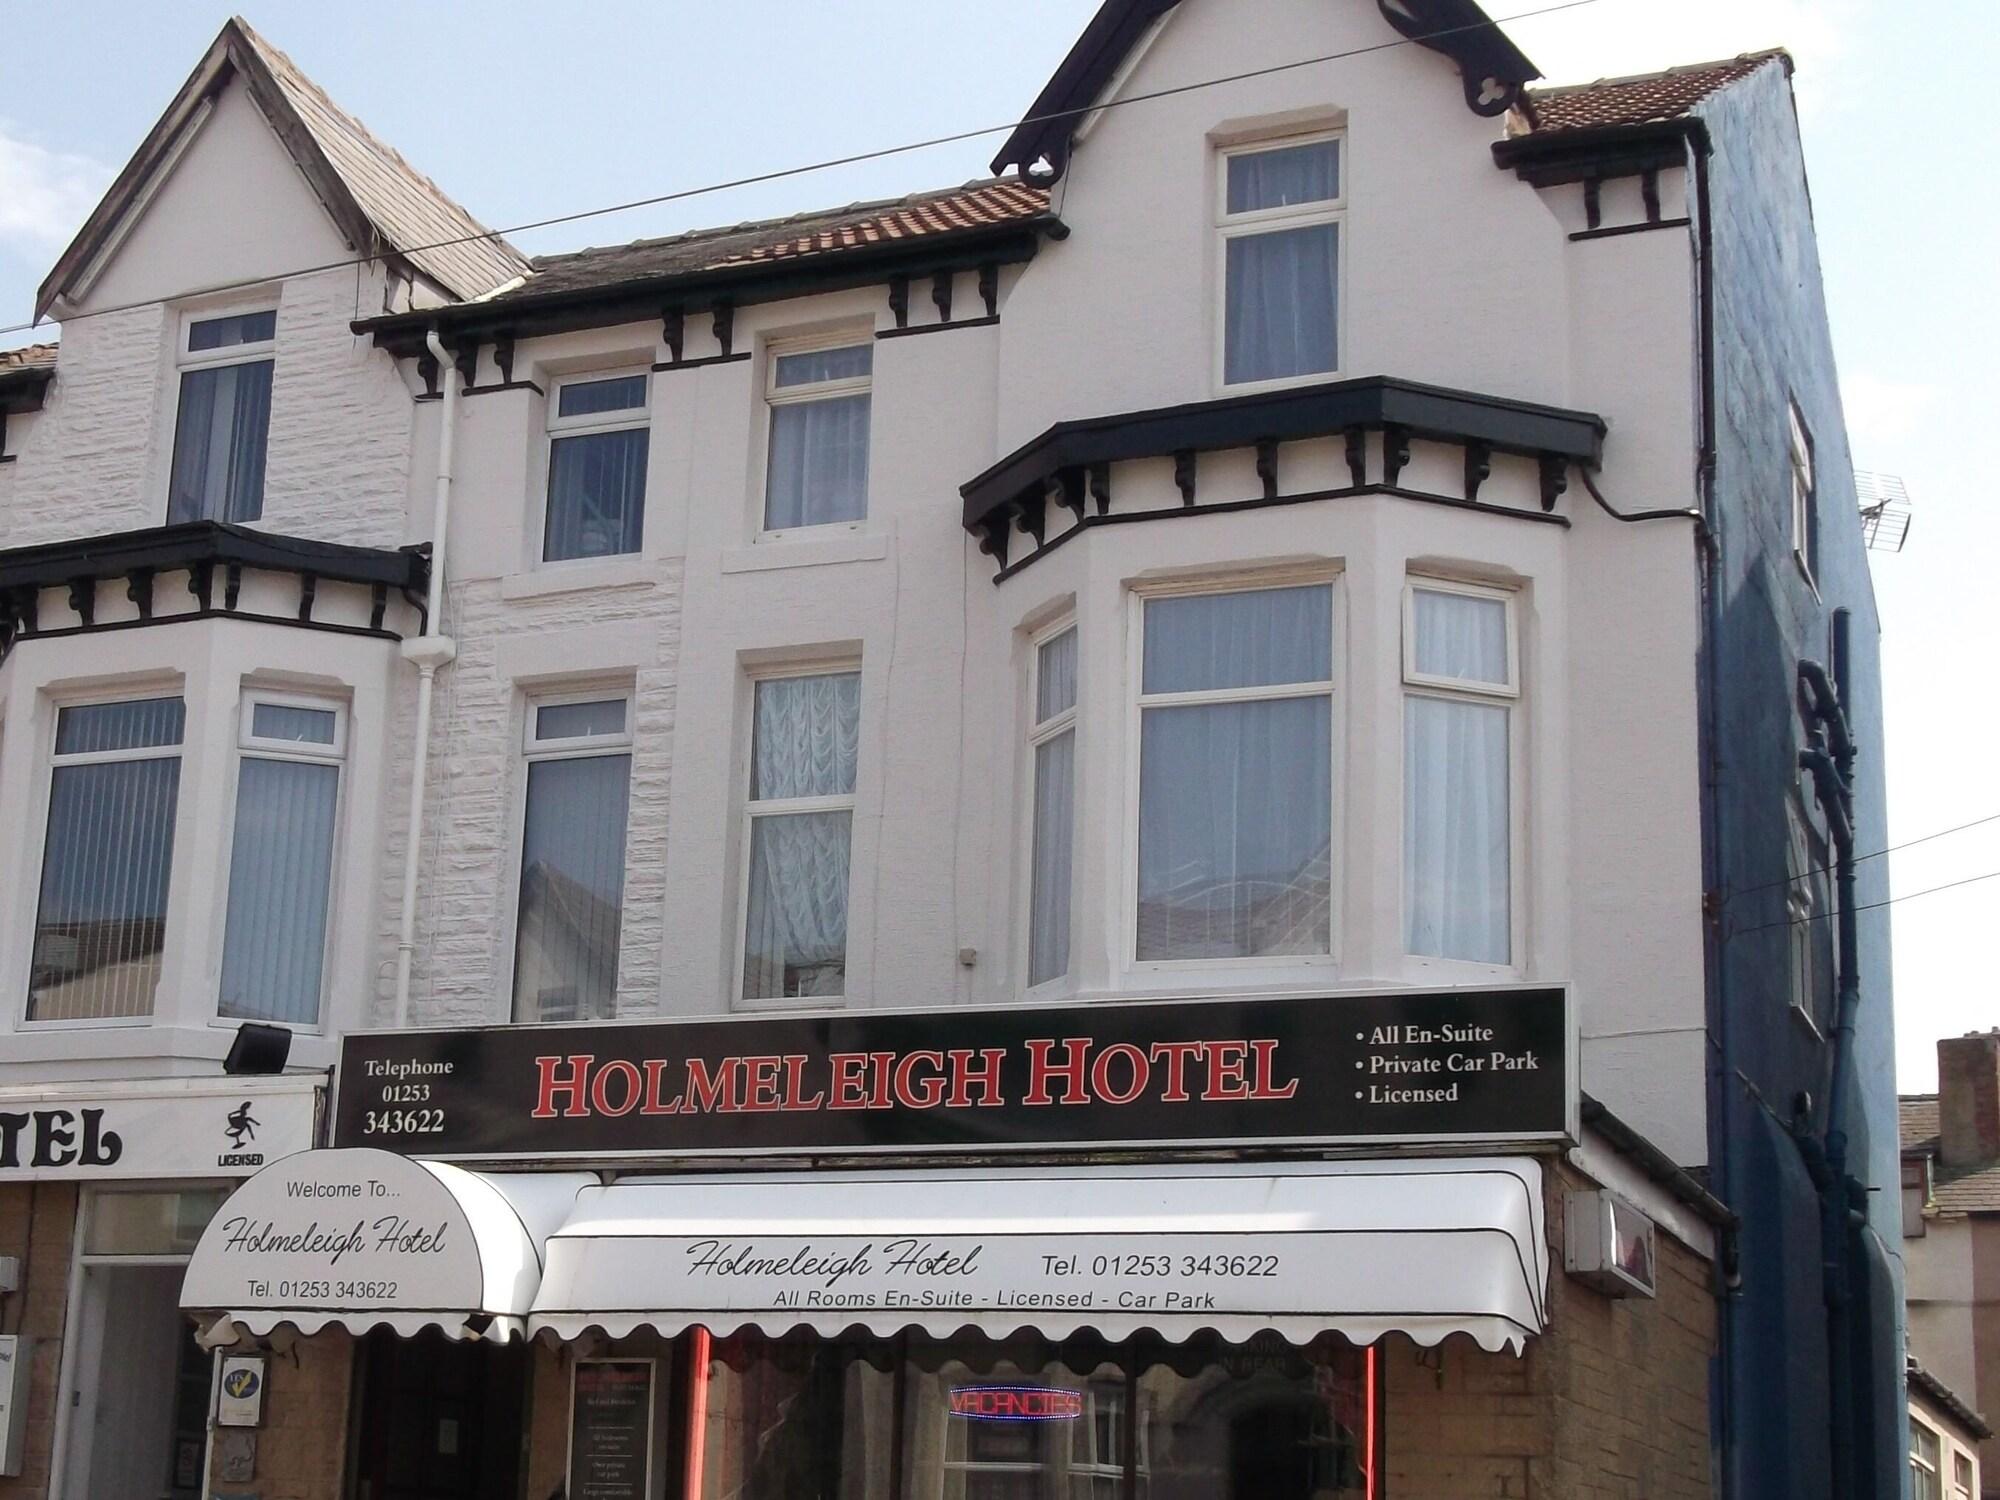 The Holmeleigh Hotel - Guest house